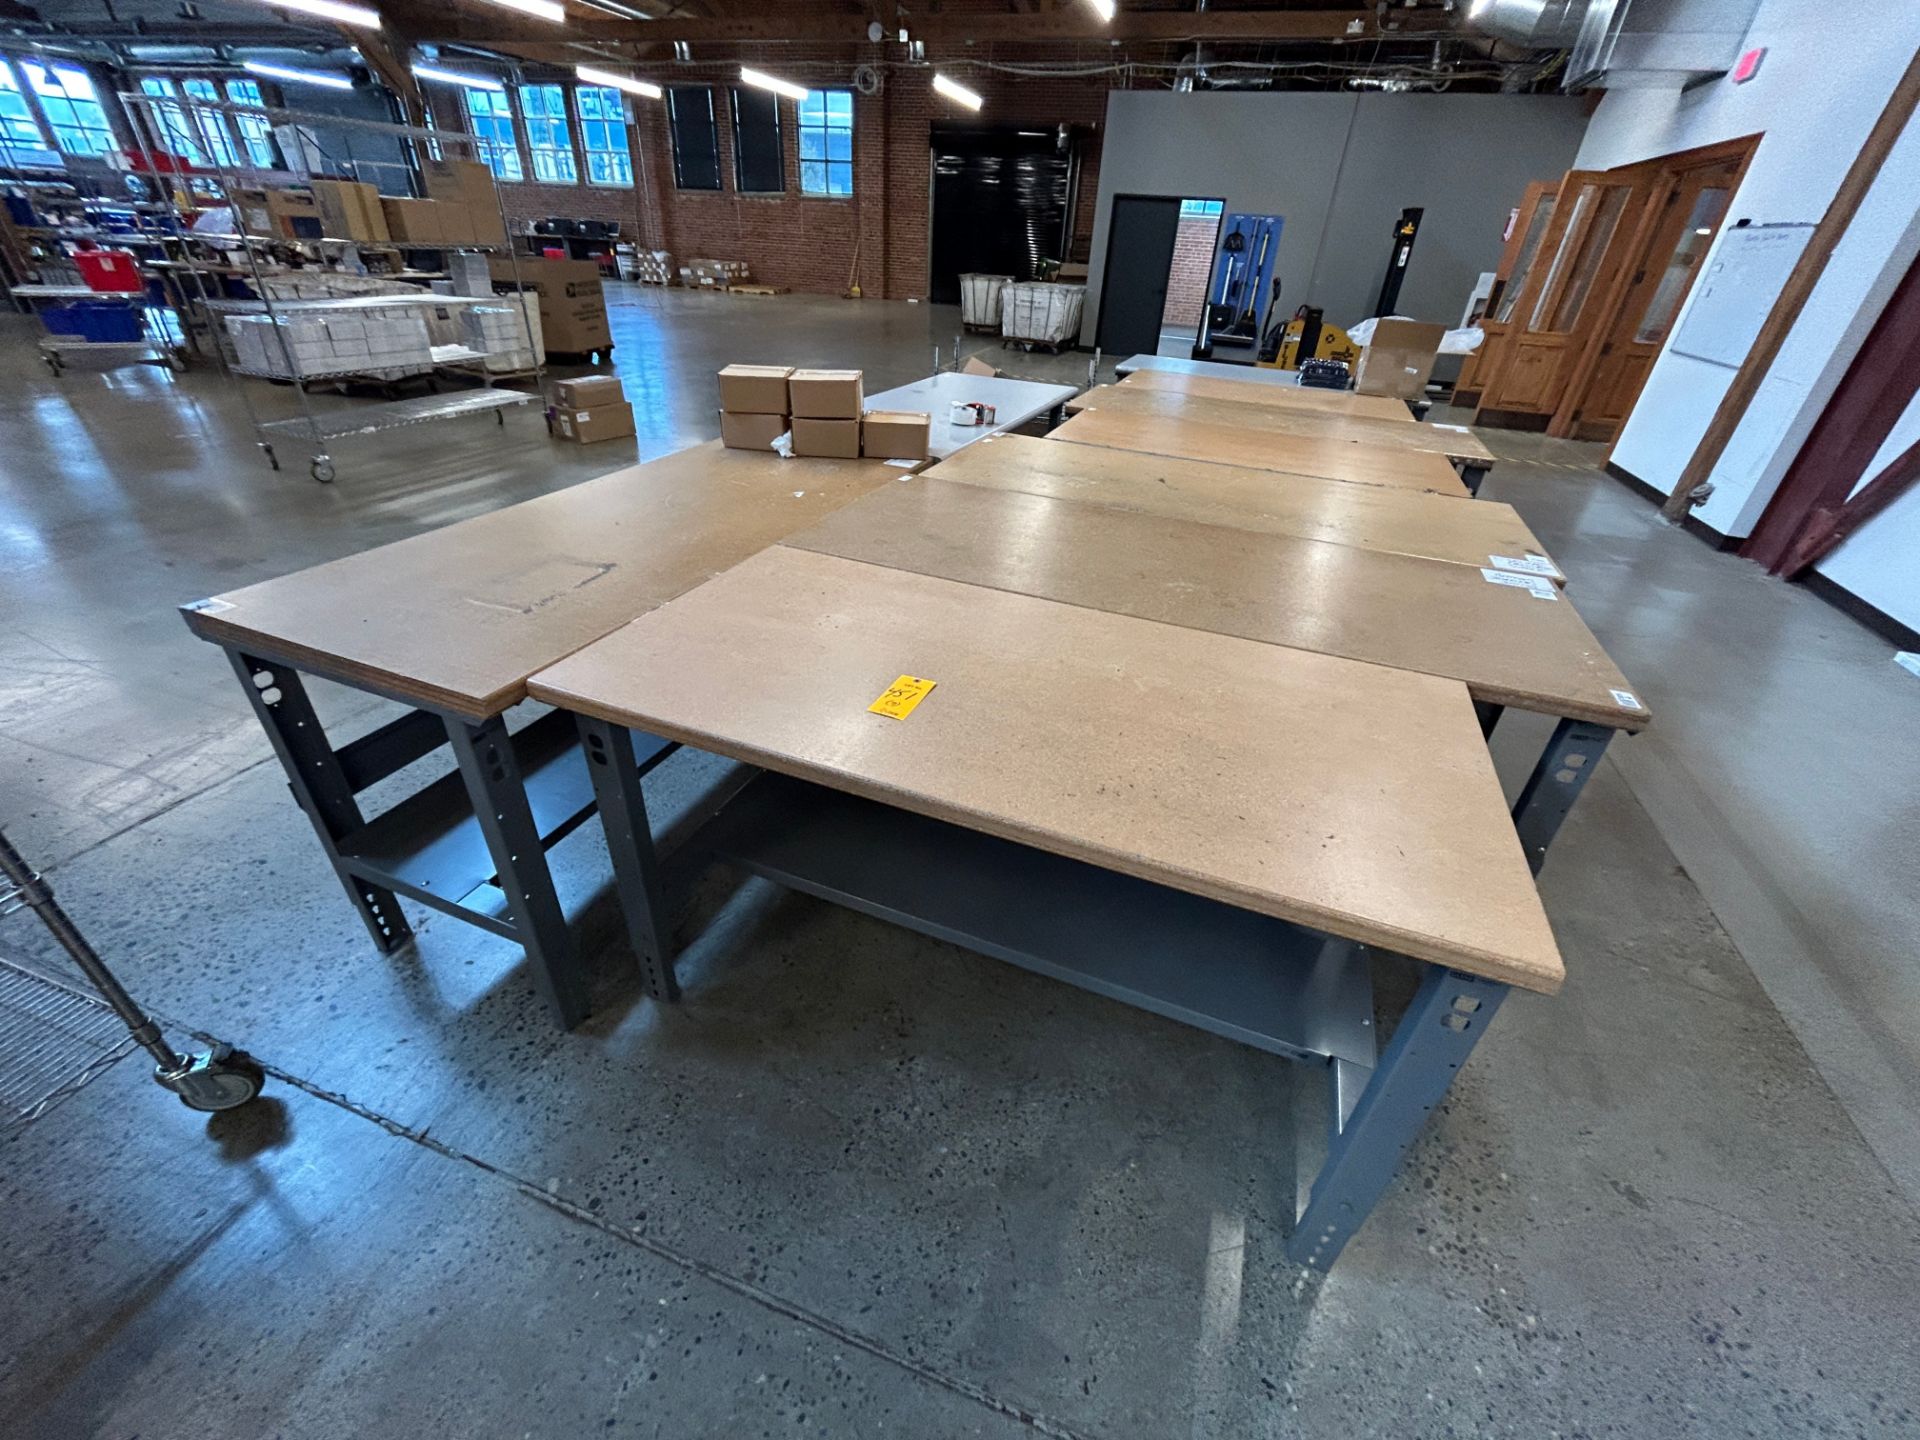 Lot (3) - Steel-Based Tables, with Wood Tops, 5.5 ft. x 3 Ft.